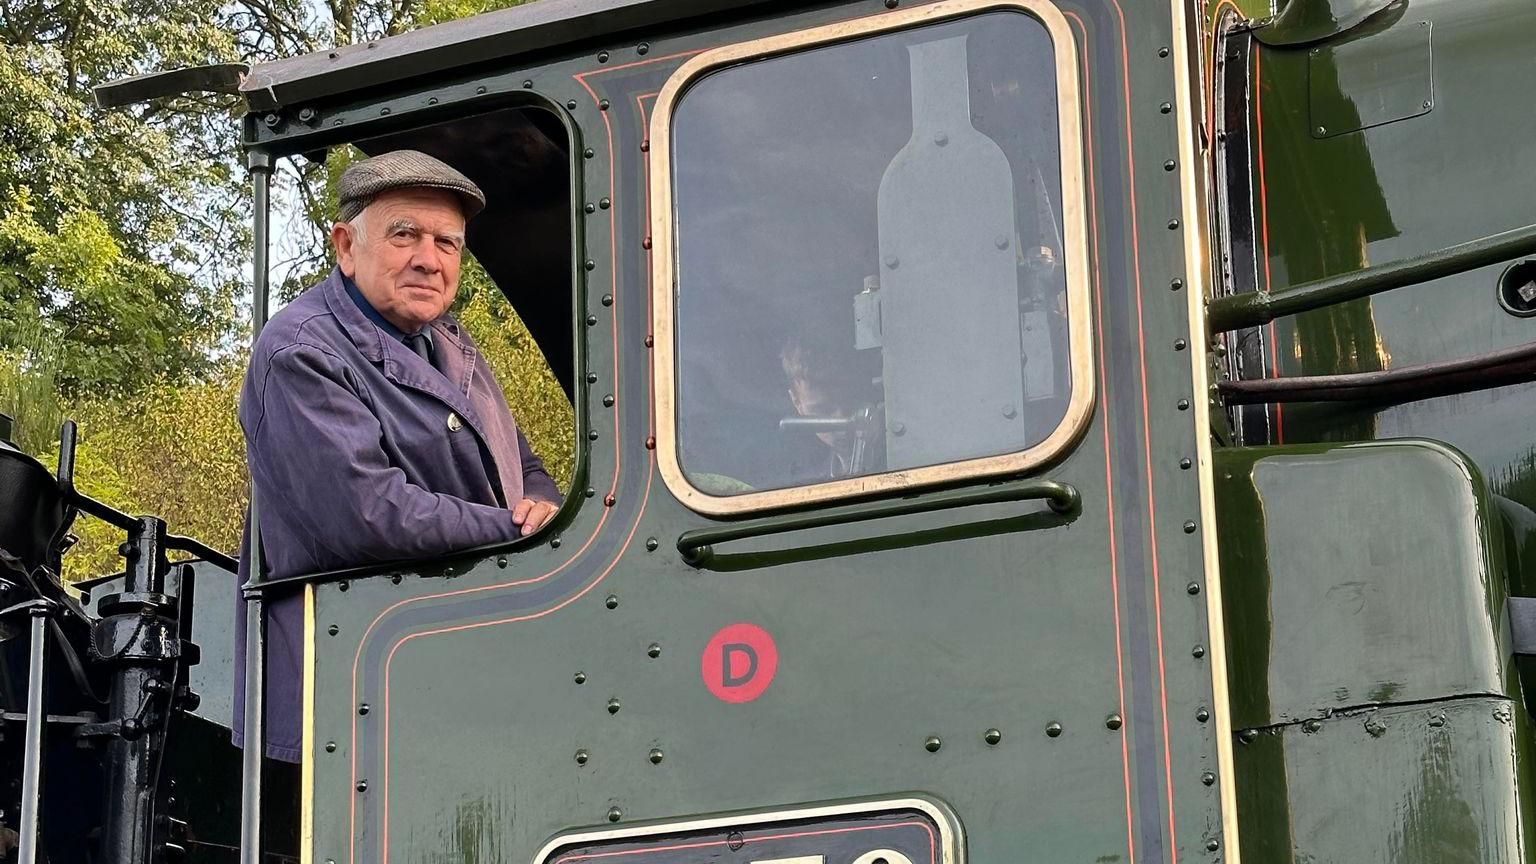 Severn Valley Railway driver retires after 50 years' service - BBC